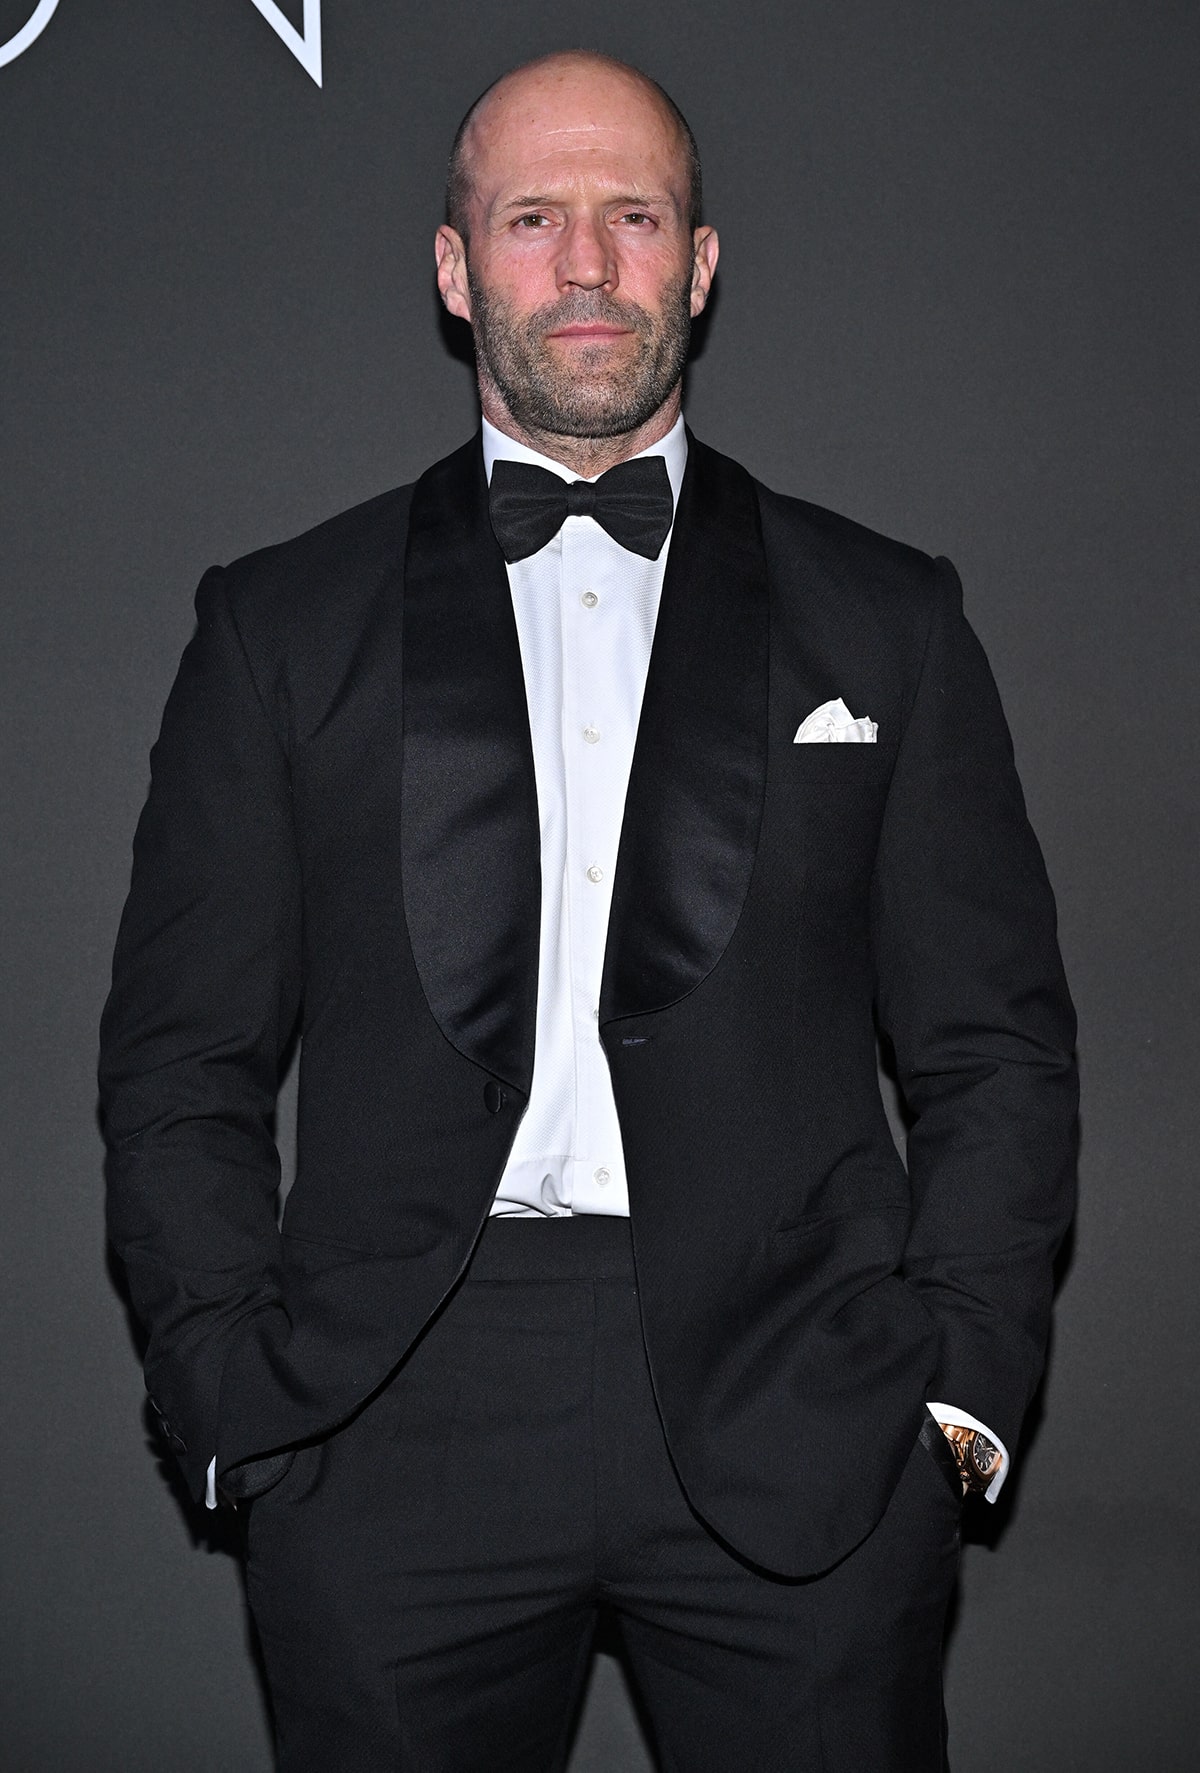 Jason Statham is best recognized for playing tough, gritty, or violent characters in action-thriller films